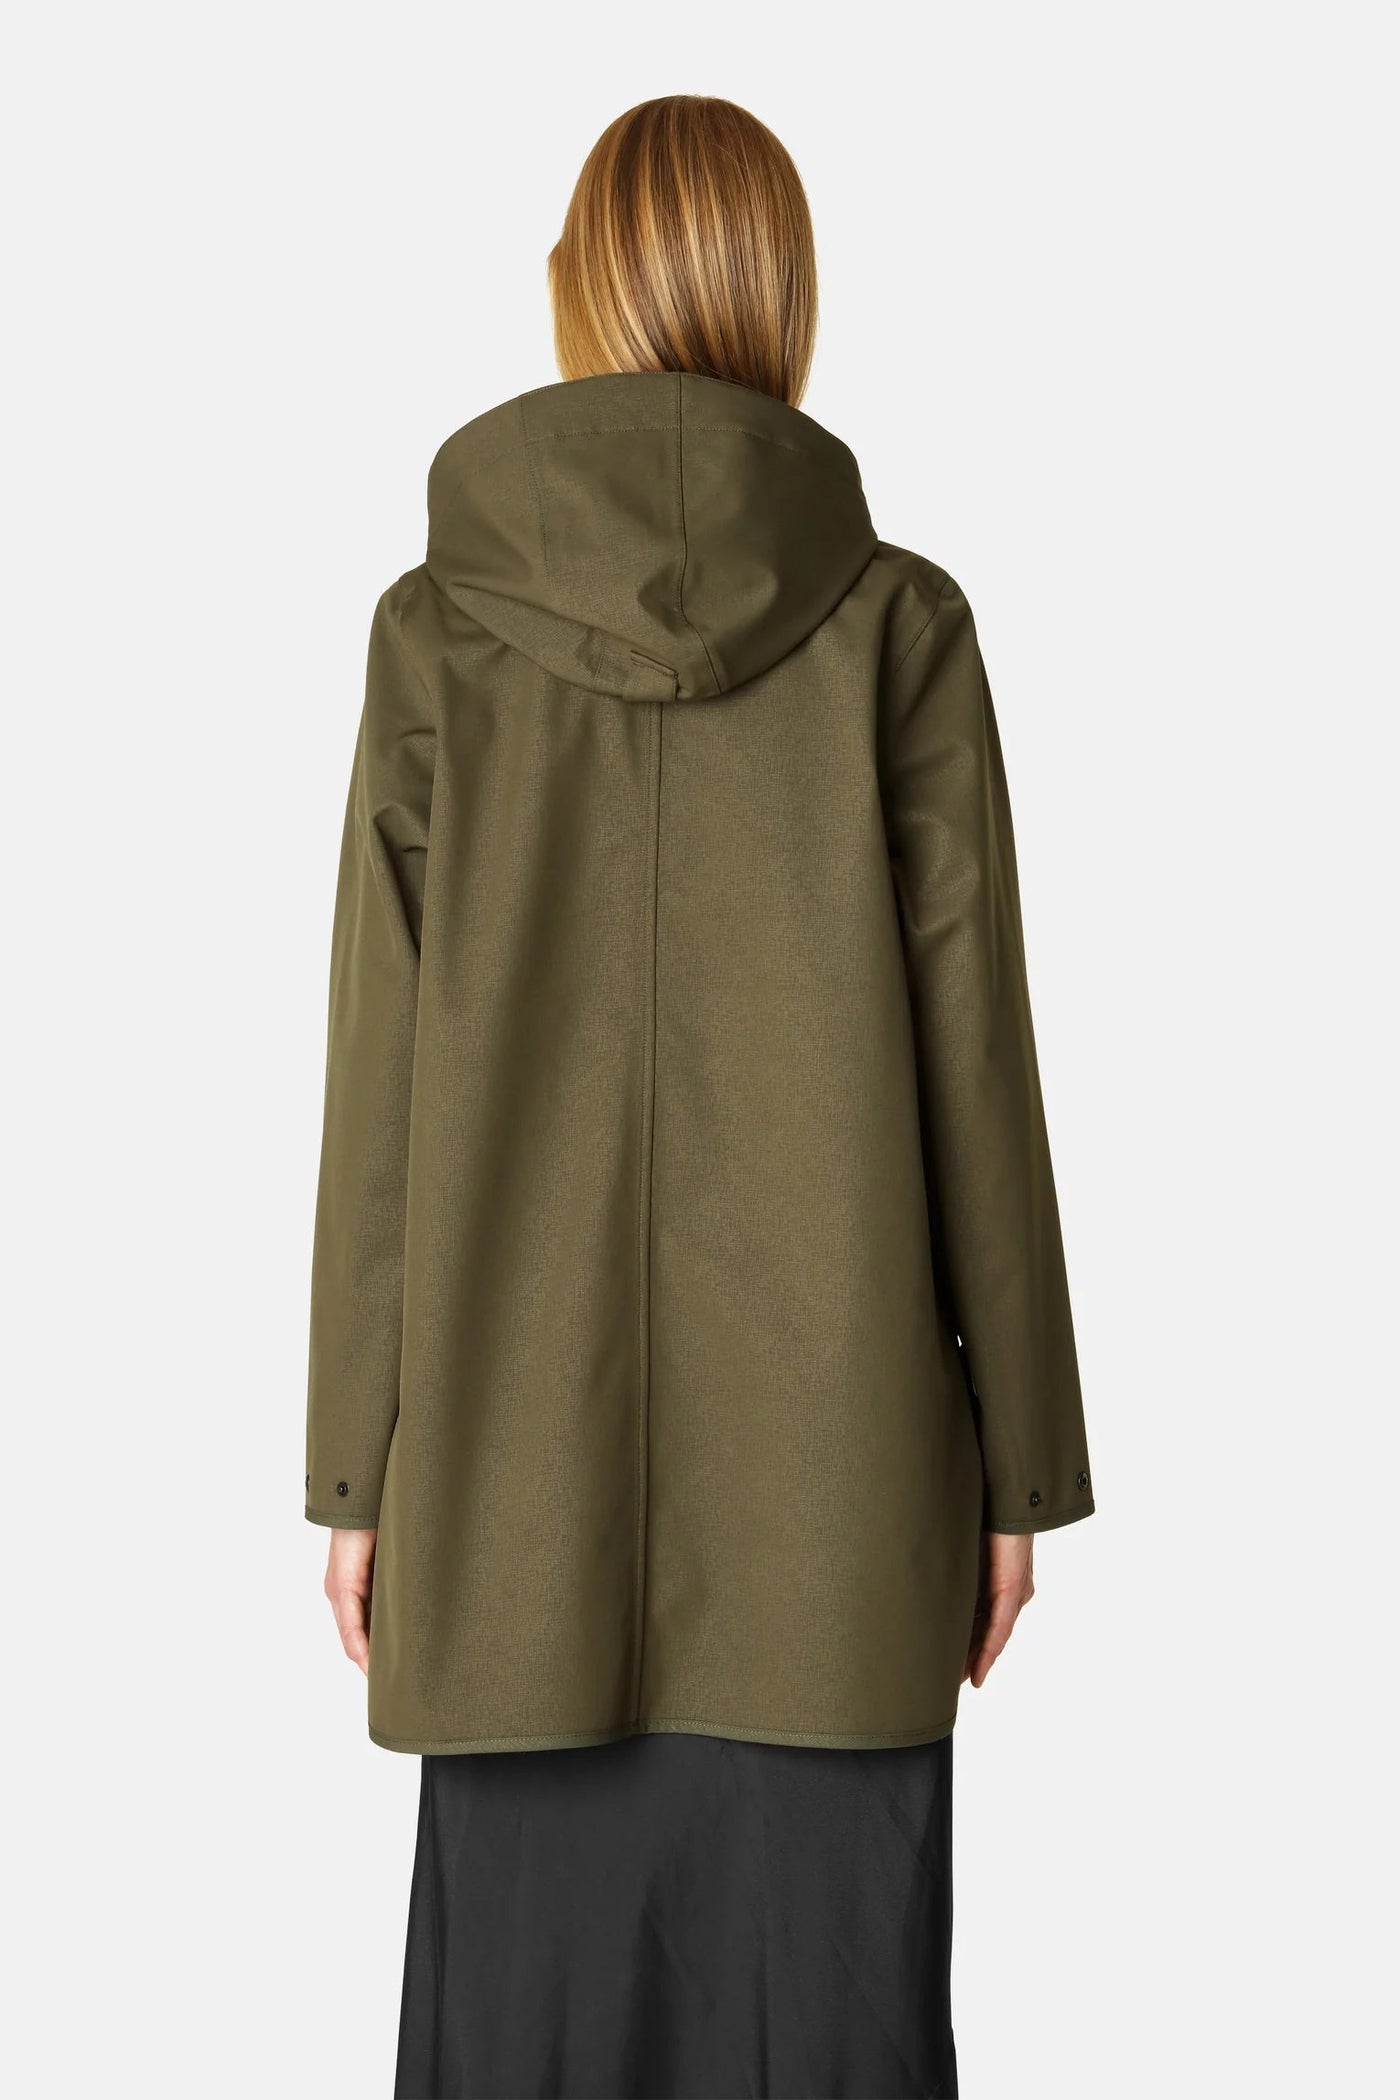 Ilse Jacobsen Rain135 In Army-Womens-Ohh! By Gum - Shop Sustainable